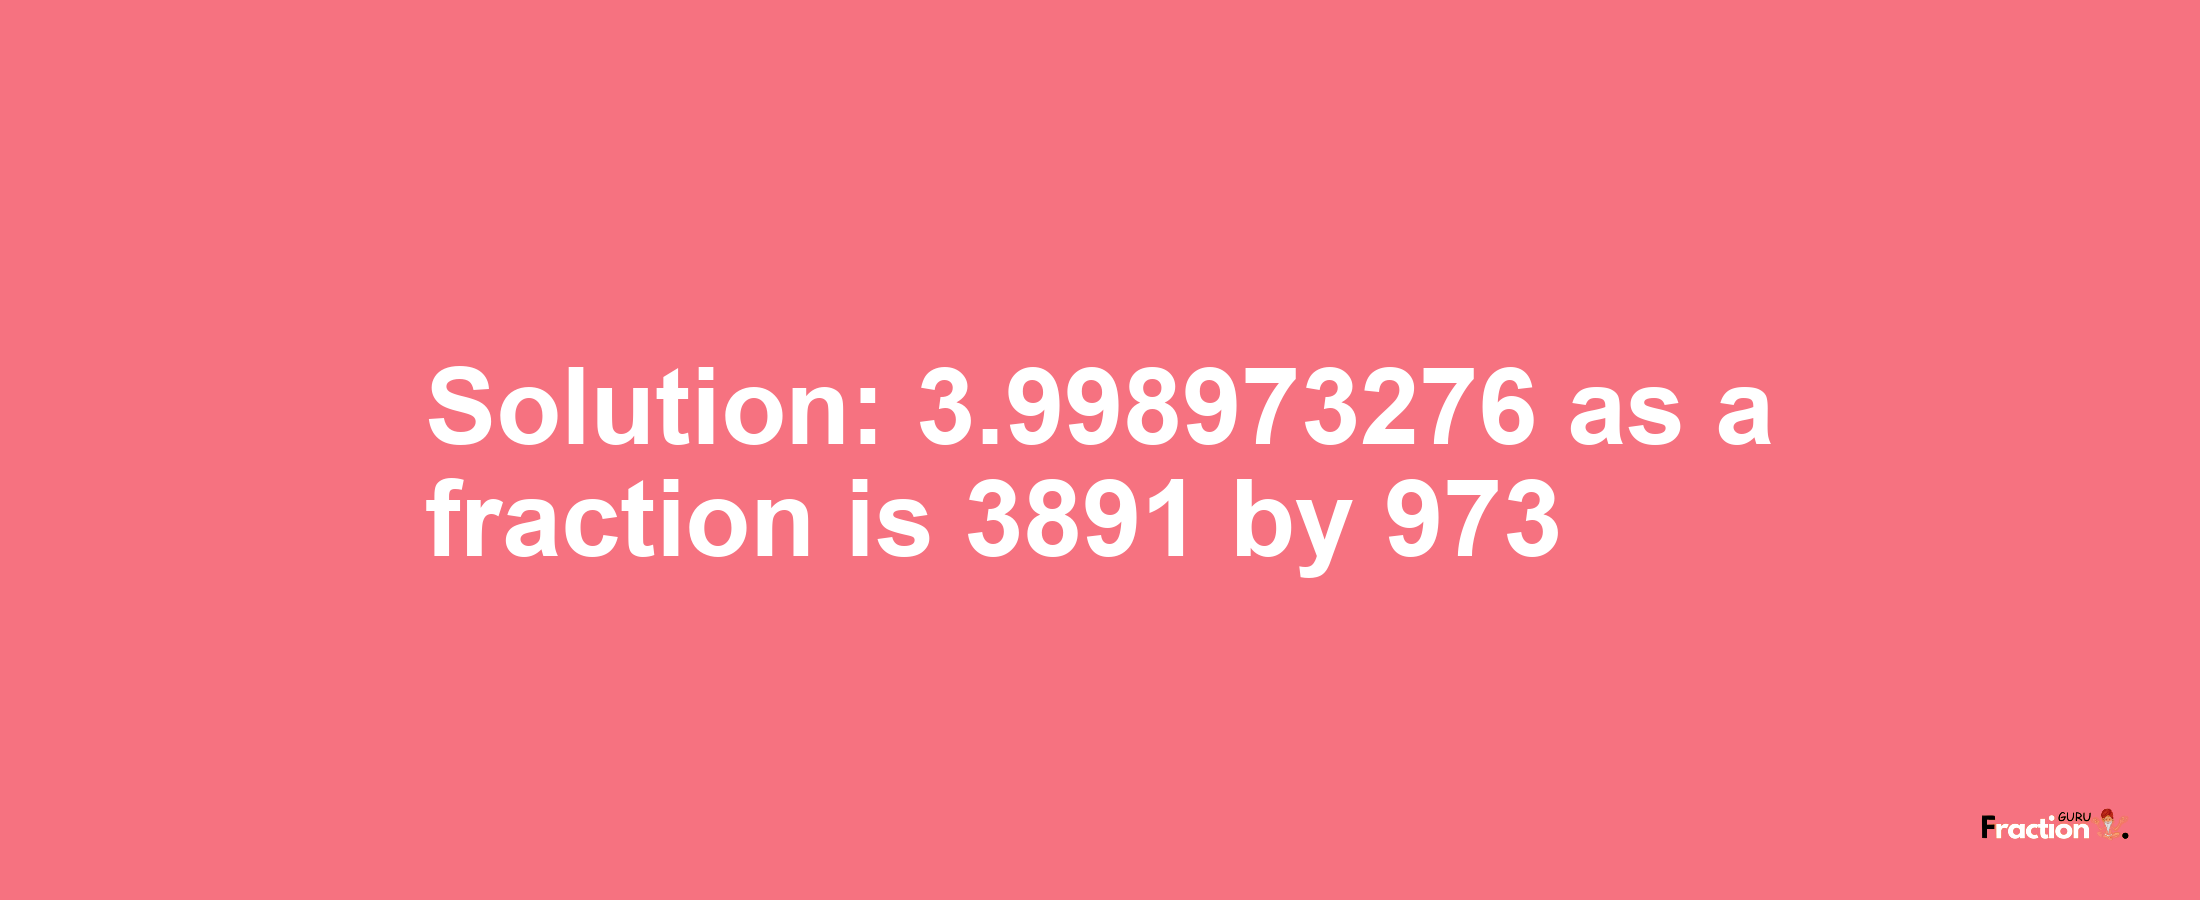 Solution:3.998973276 as a fraction is 3891/973